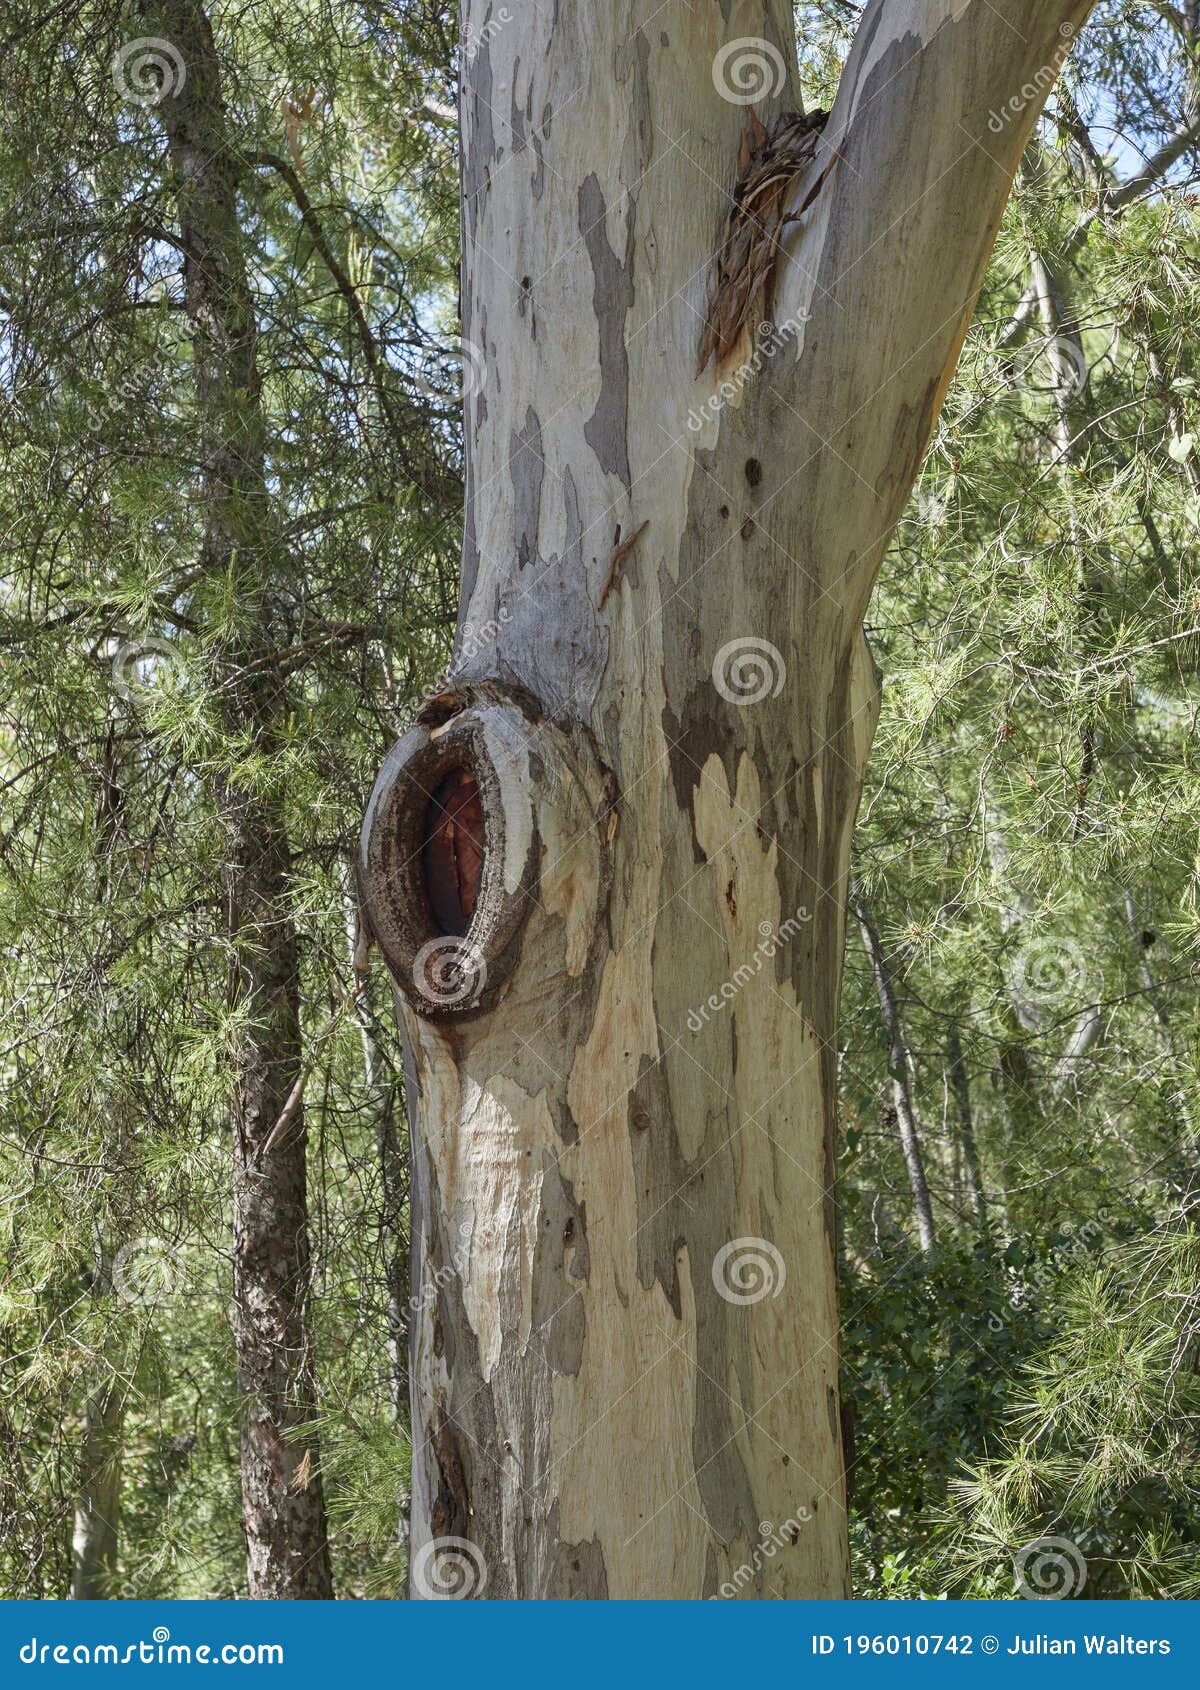 close up of the flaking peeling bark of a eucalyptus tree in the raja ancha recreation area in pizarra, andalucia, spain.